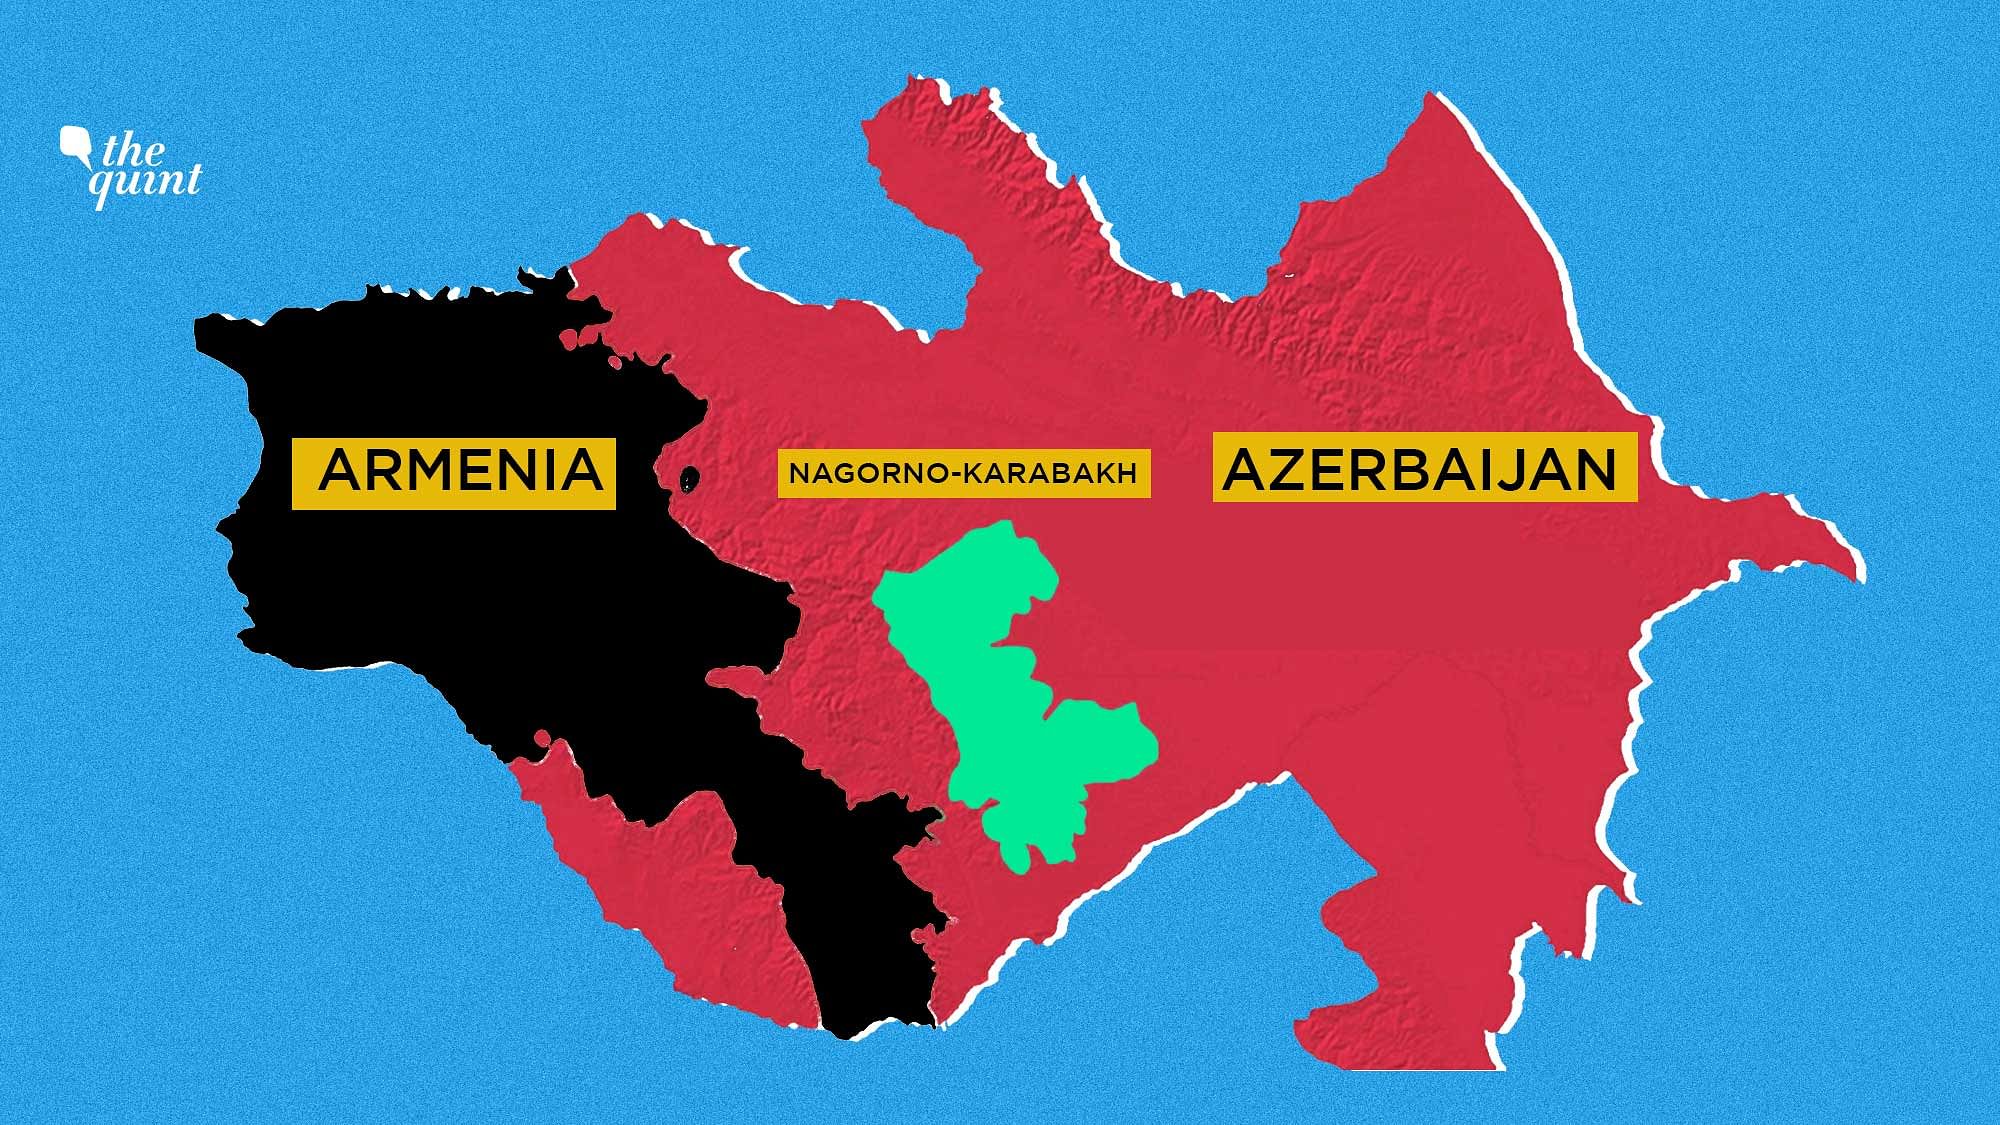 Fresh clashes have erupted over the longstanding Nagorno-Karabakh dispute since Sunday.